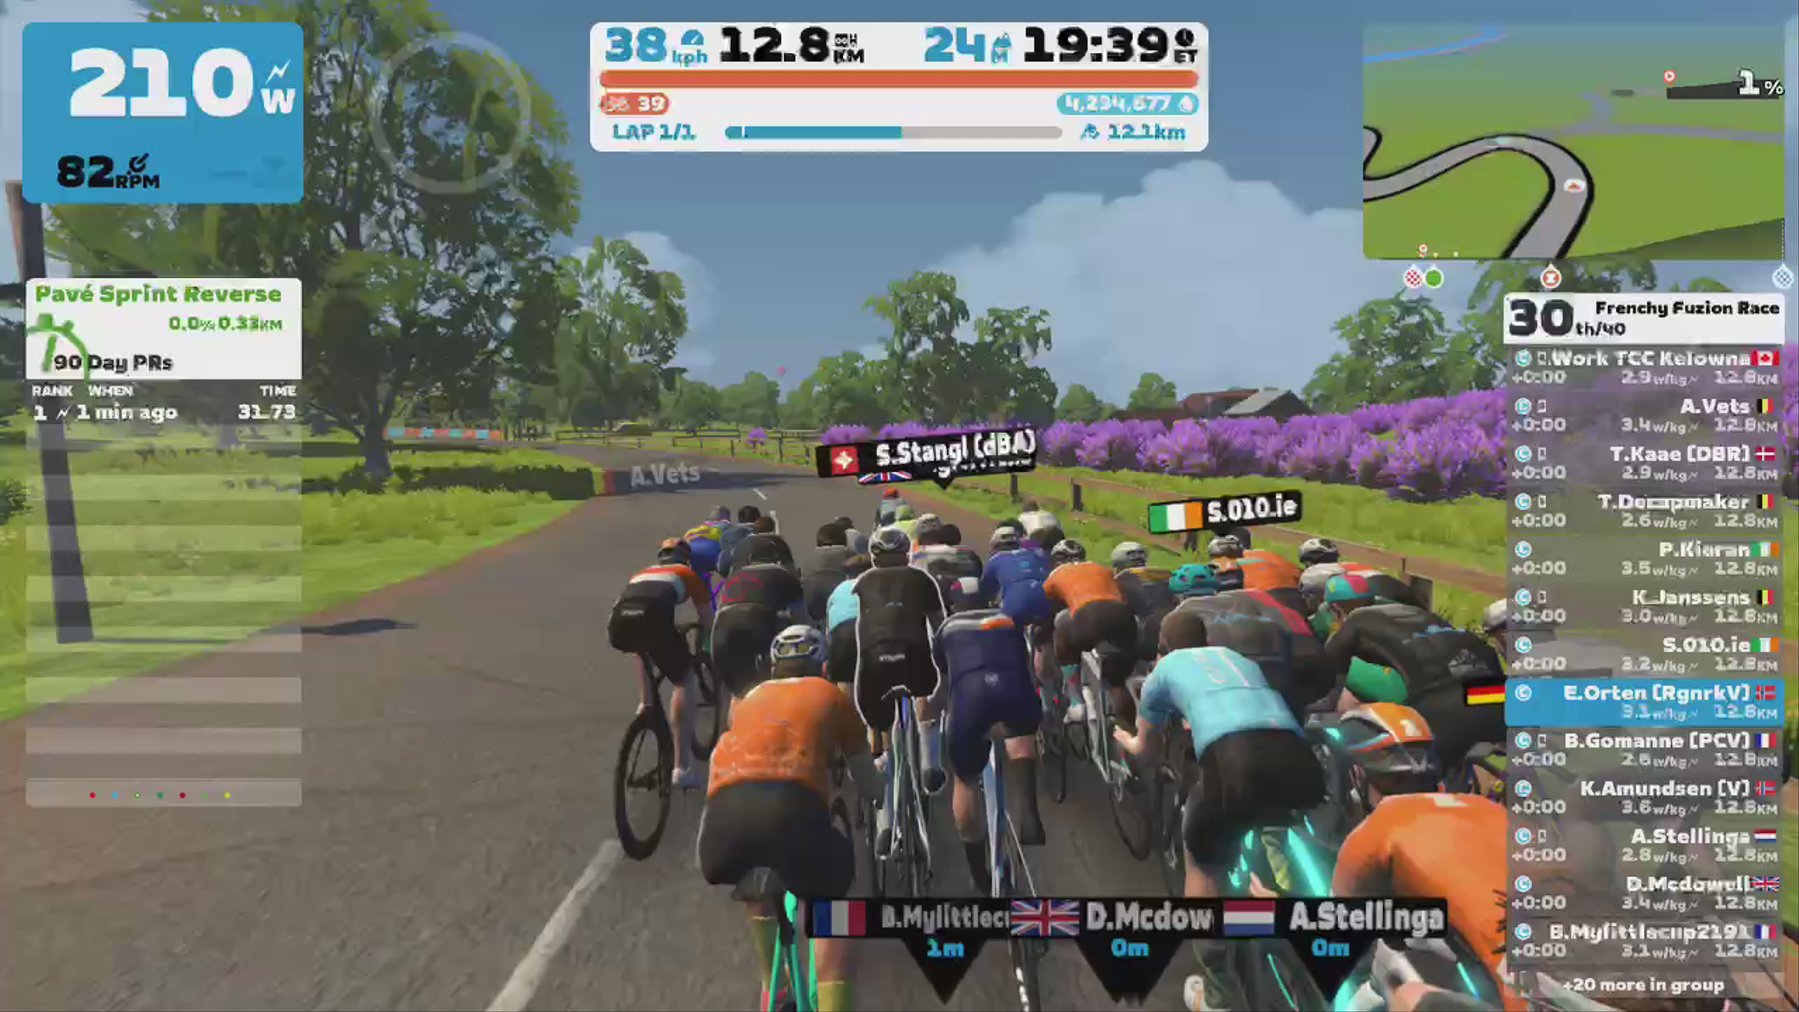 Zwift - Race: Frenchy Fuzion Race (C) on R.G.V. in France